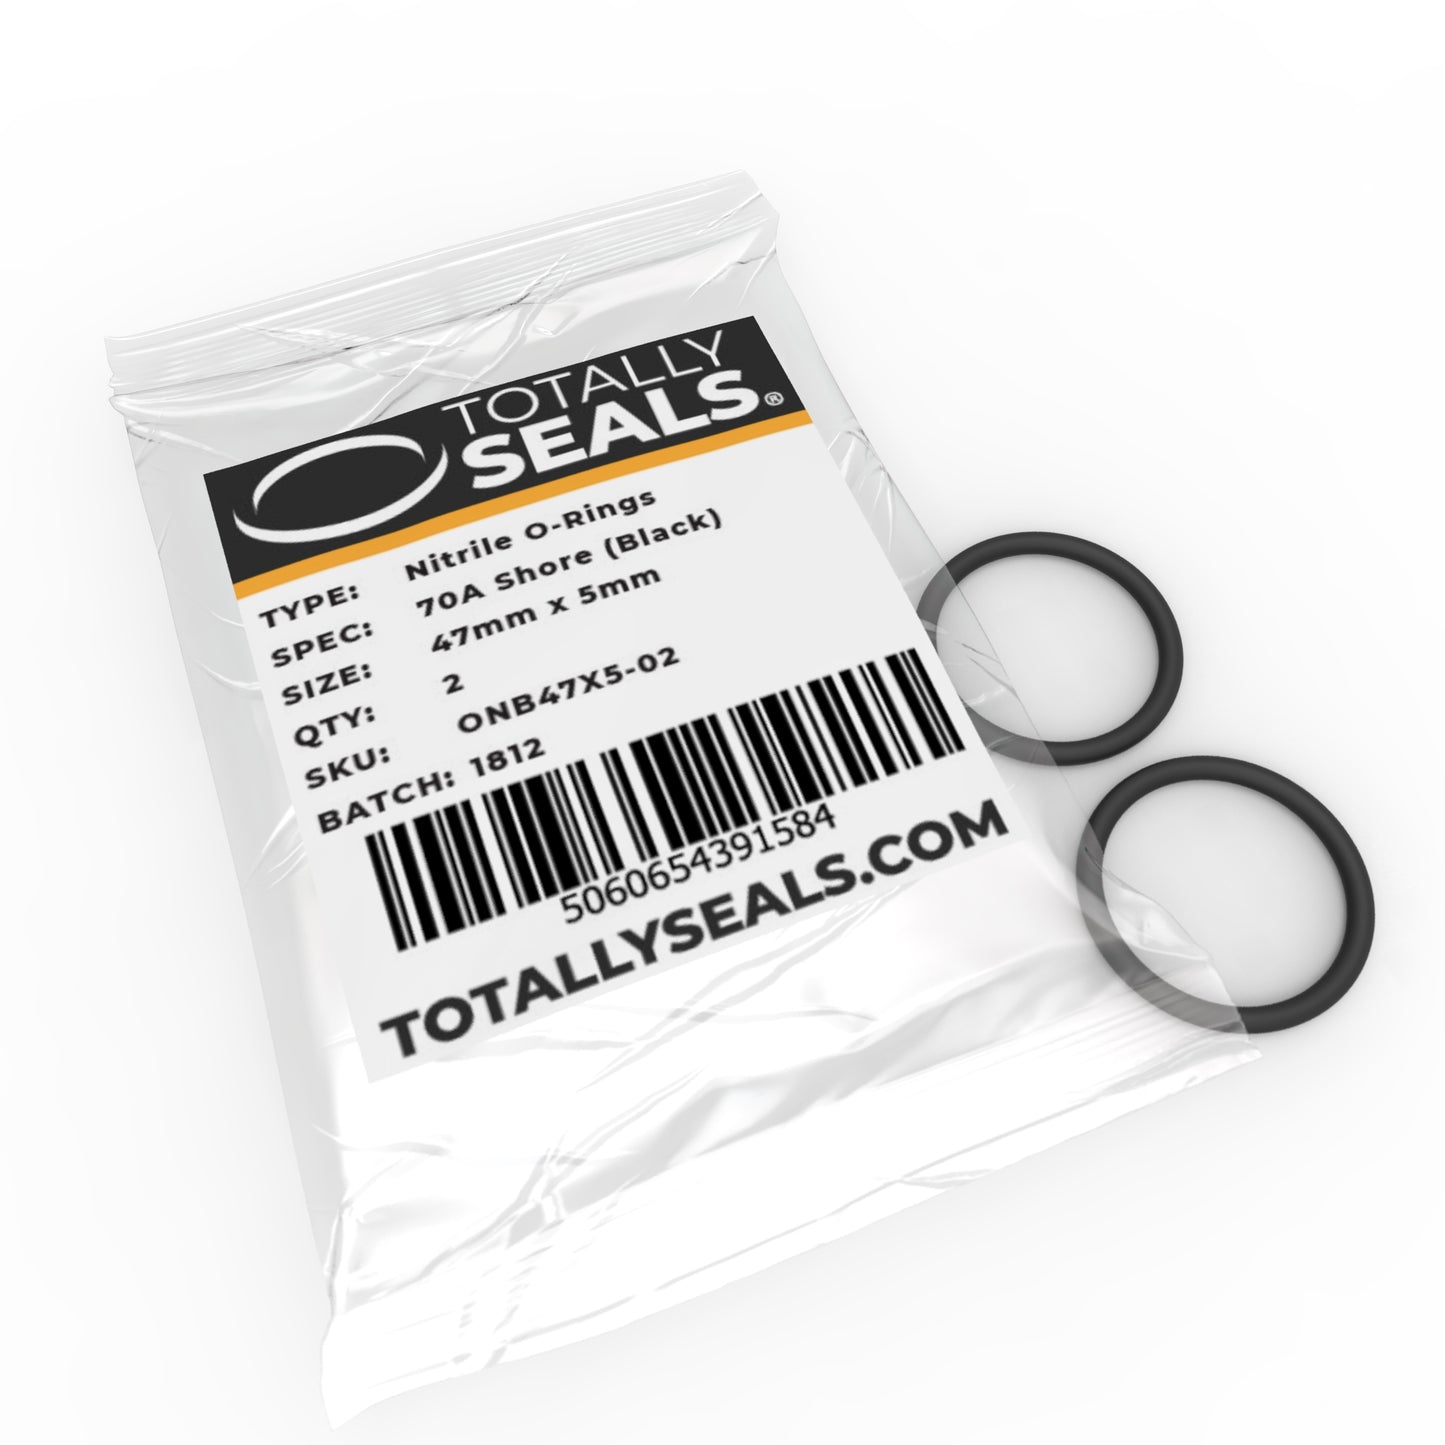 47mm x 5mm (57mm OD) Nitrile O-Rings - Totally Seals®